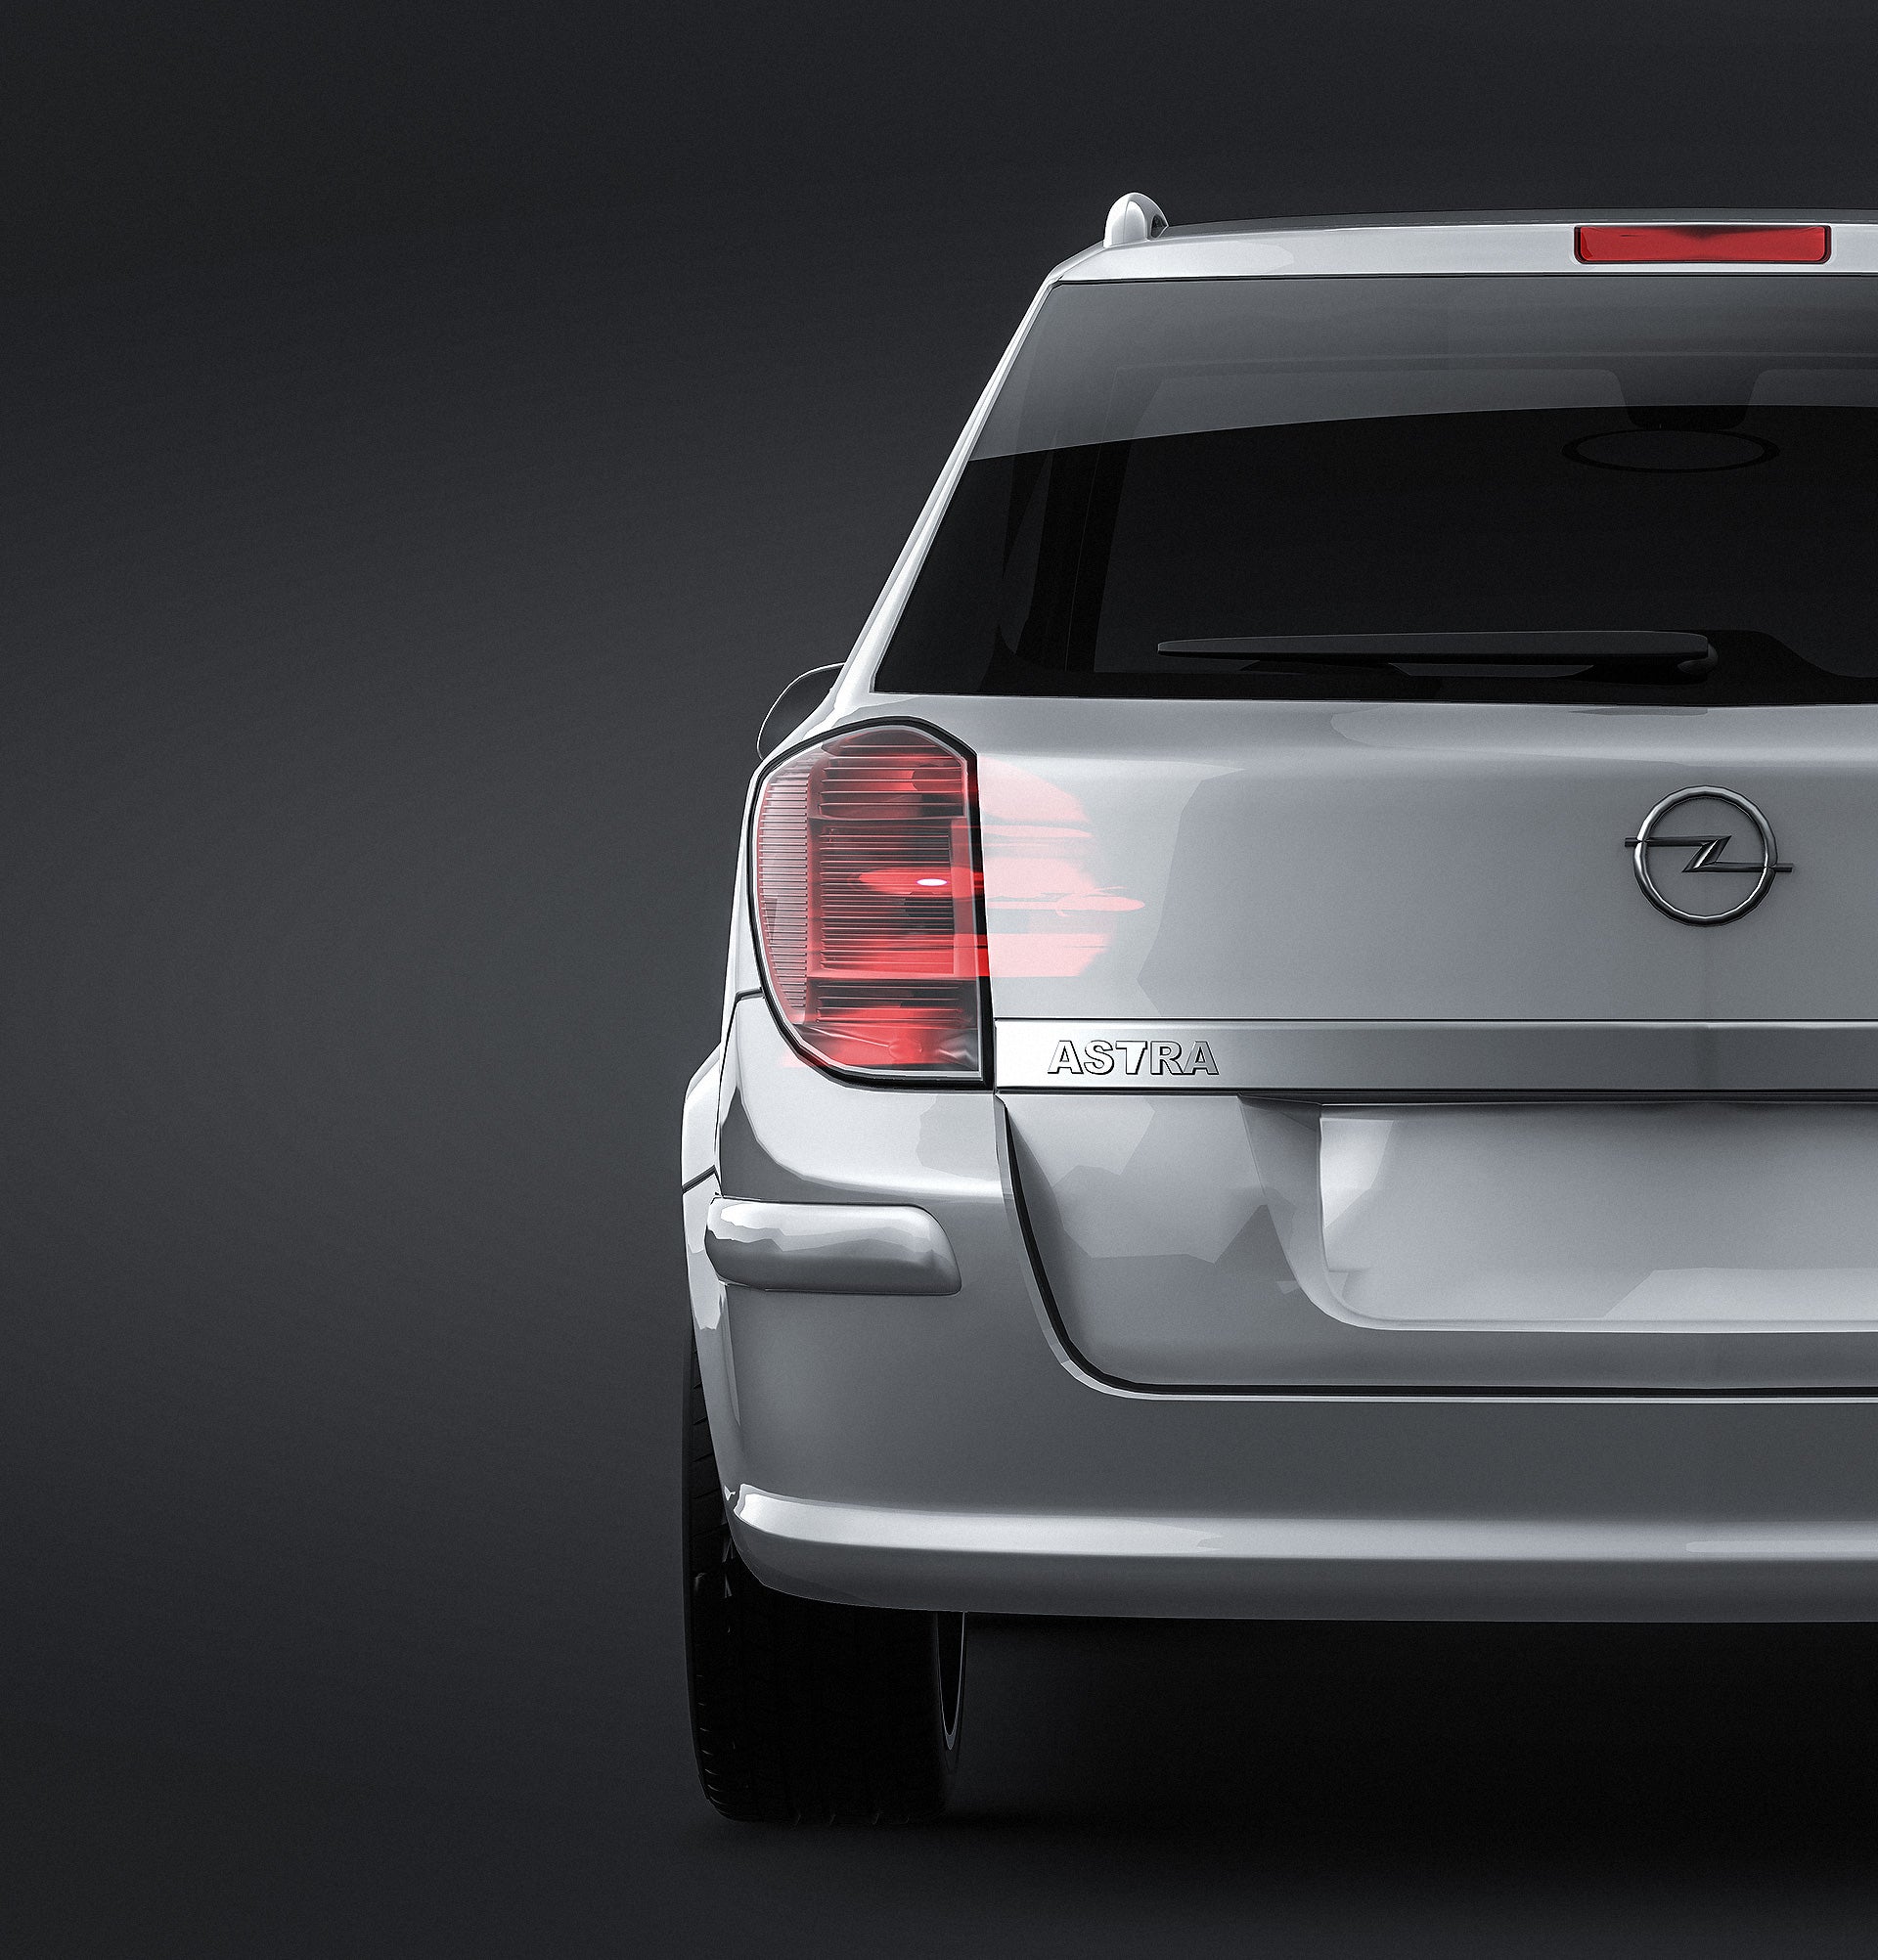 Opel Astra H Touring glossy finish - all sides Car Mockup Template.psd